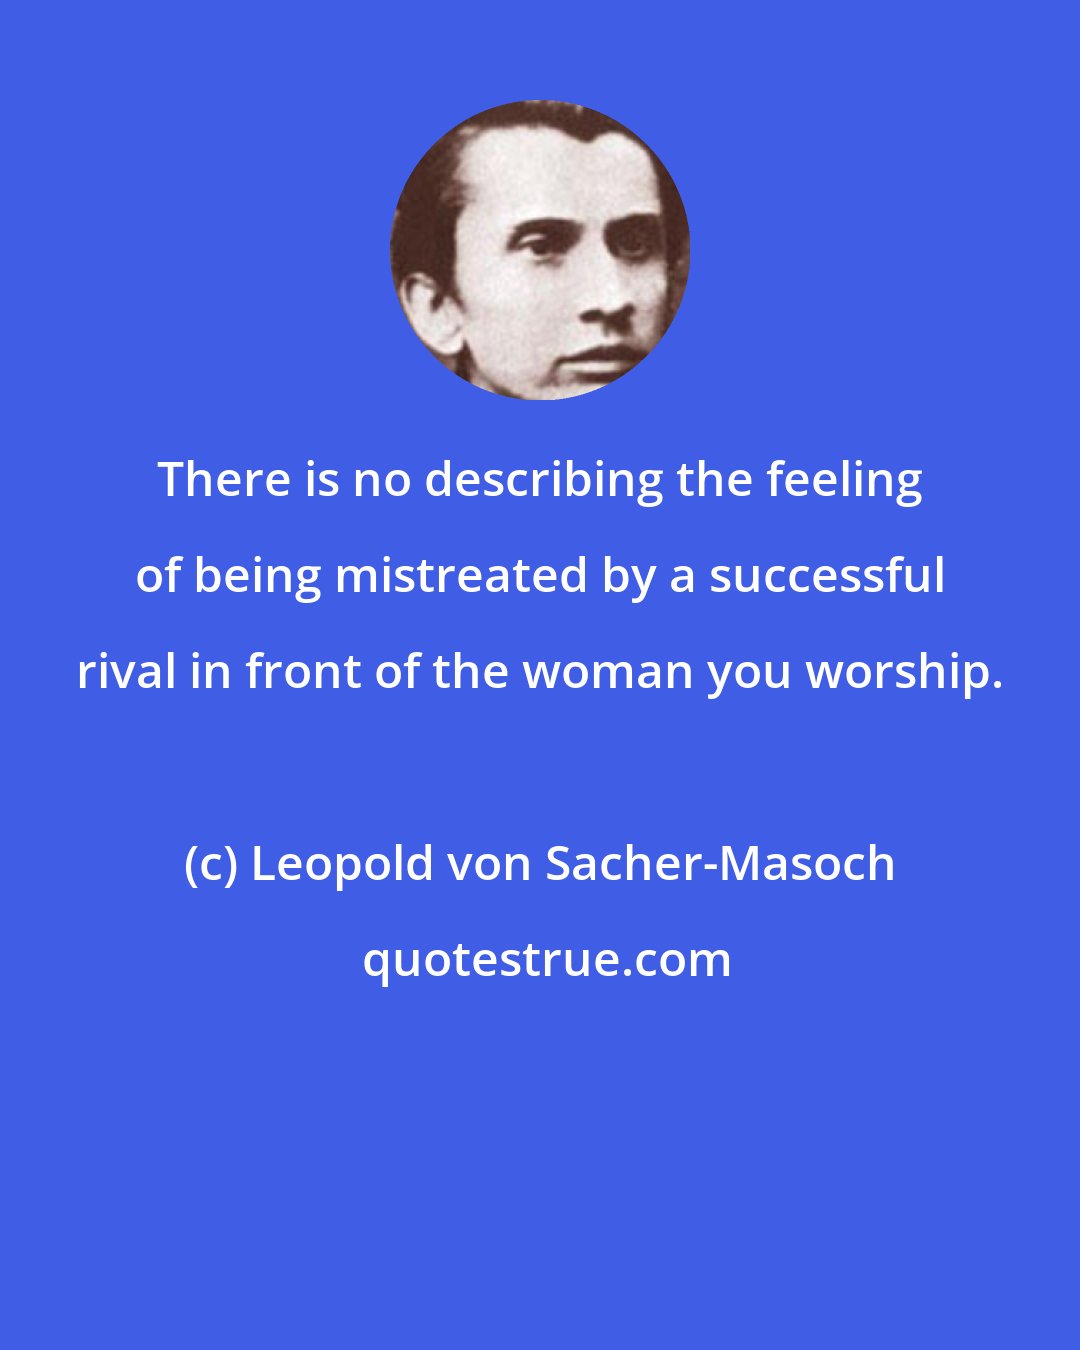 Leopold von Sacher-Masoch: There is no describing the feeling of being mistreated by a successful rival in front of the woman you worship.